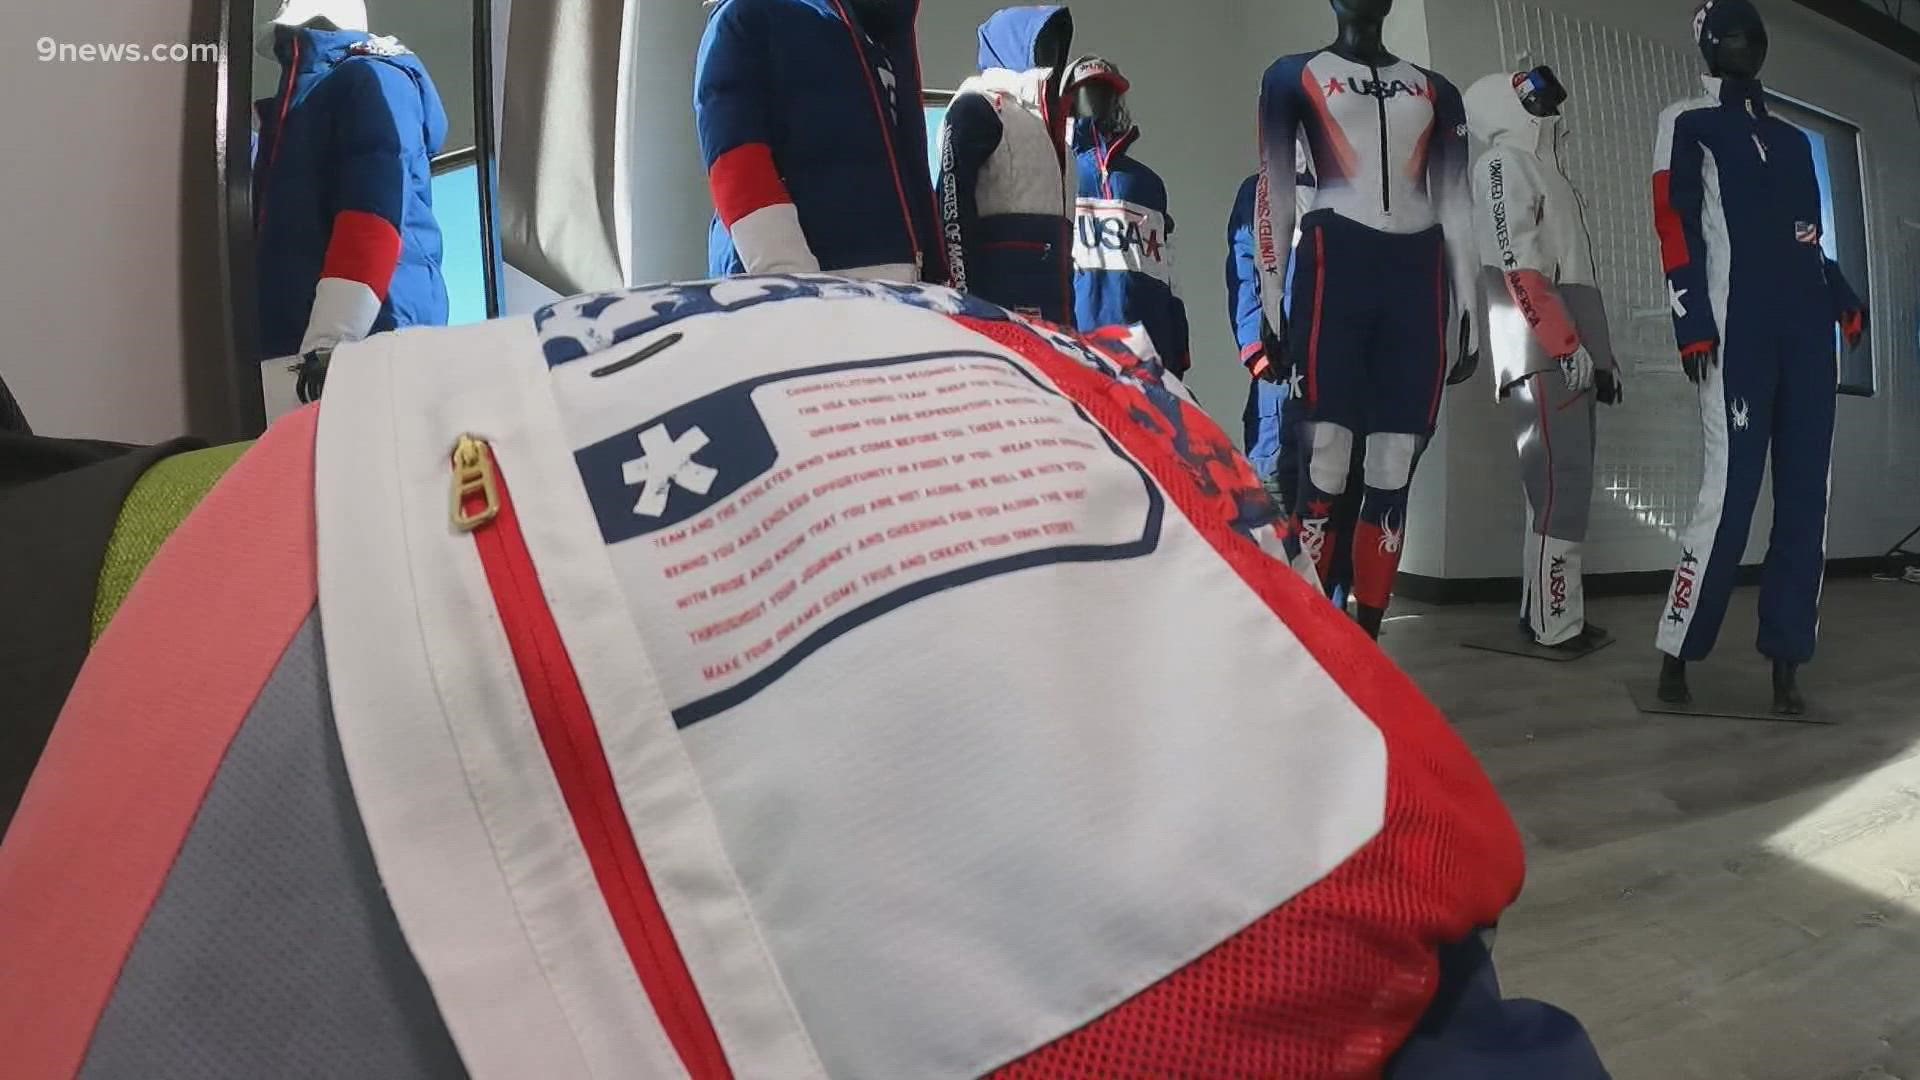 Spyder designed the clothes that U.S. skiers and snowboarders are wearing at the Olympics.